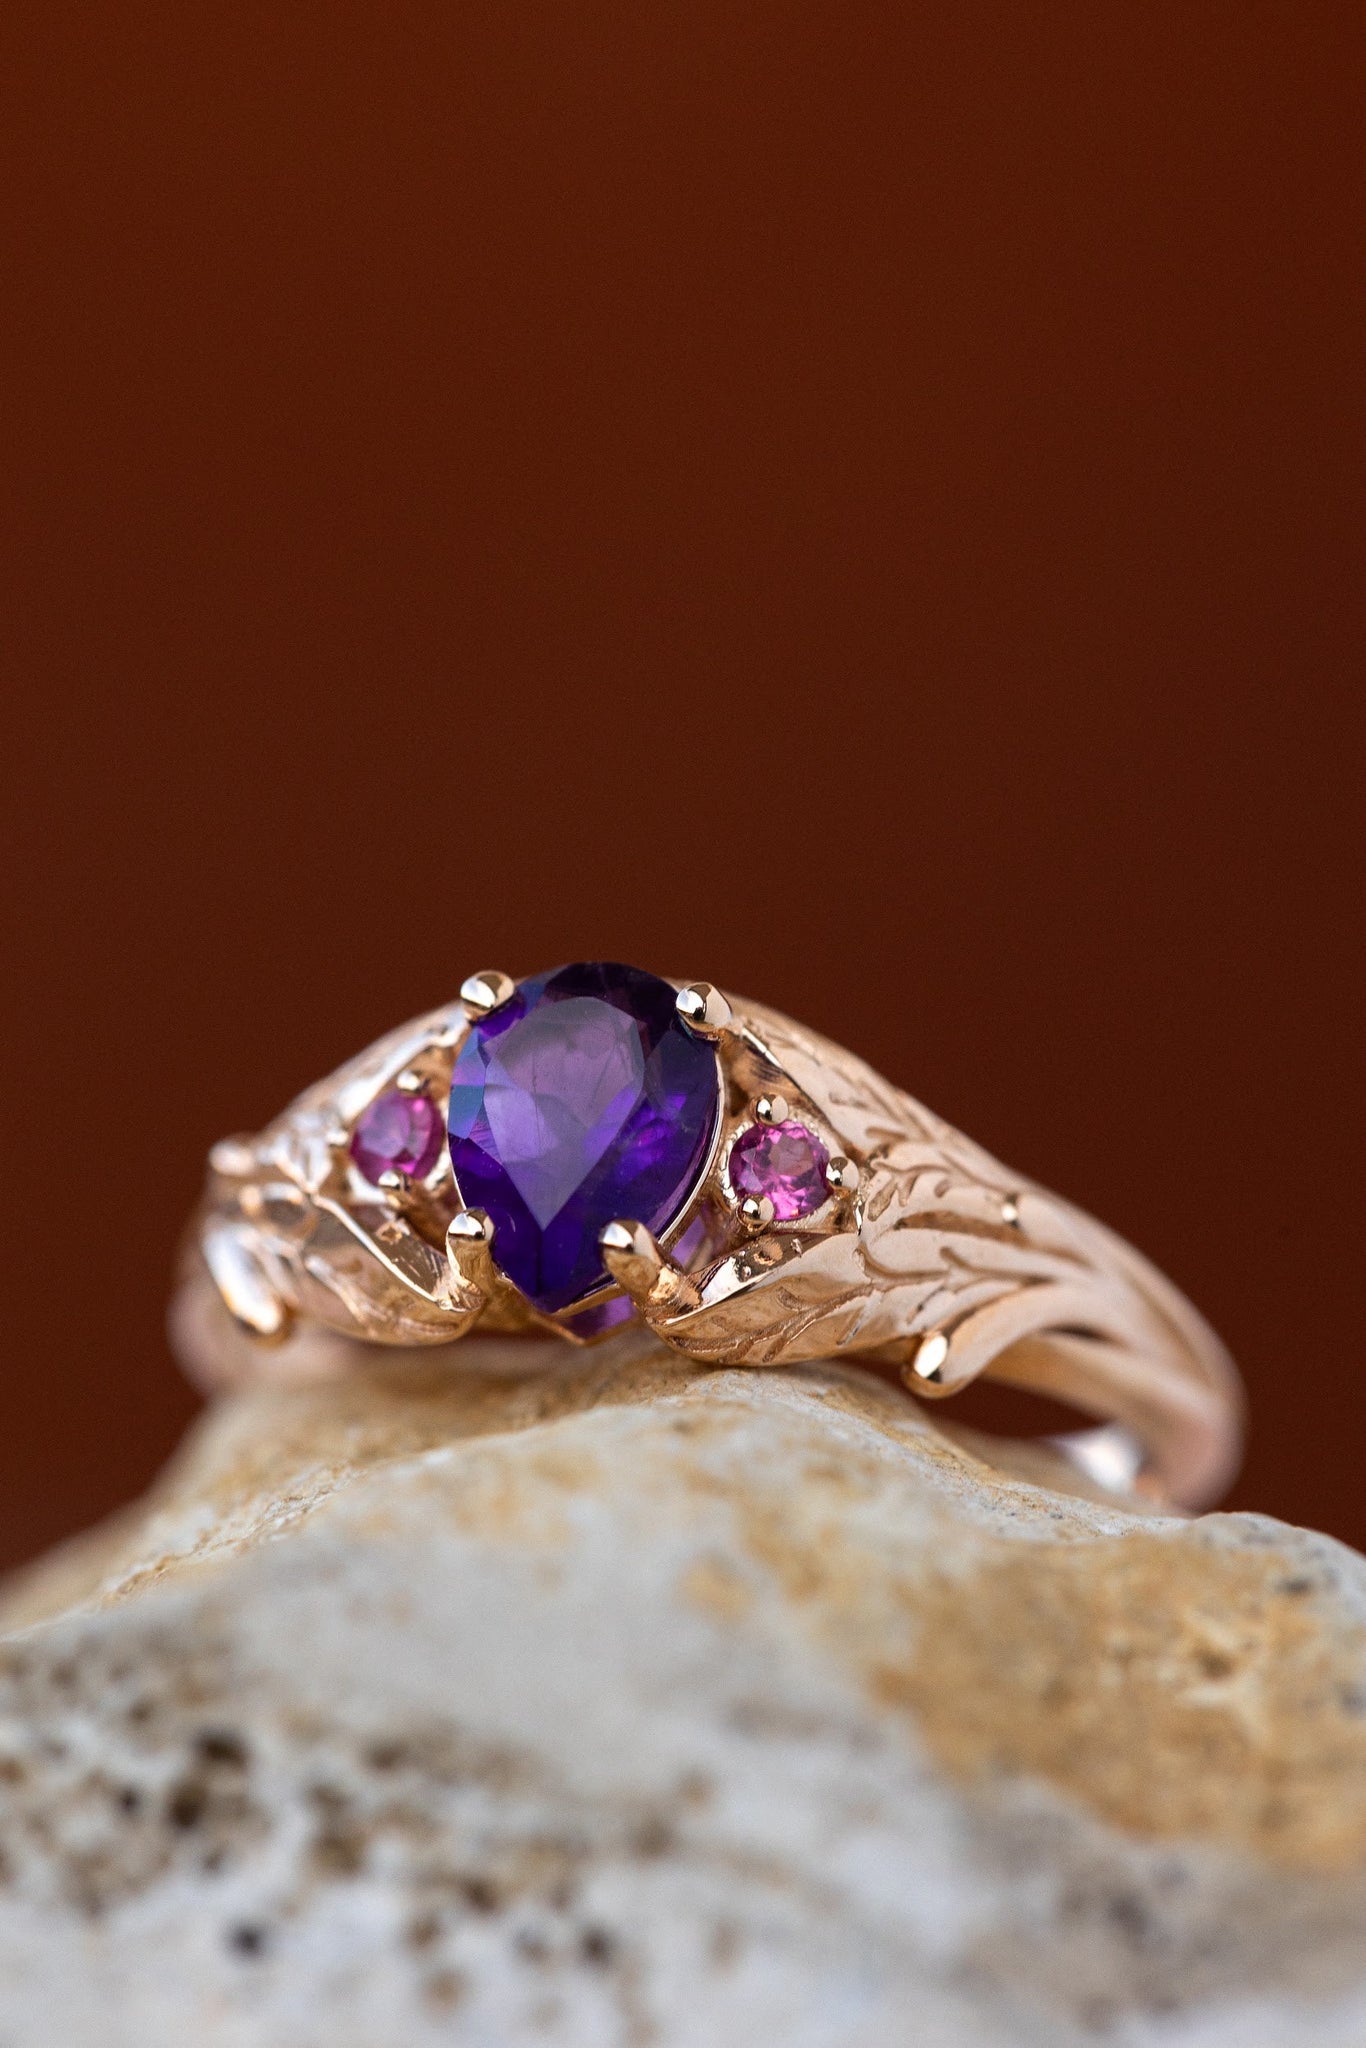 Pear amethyst engagement ring, gold leaf ring with pink tourmalines / Wisteria - Eden Garden Jewelry™